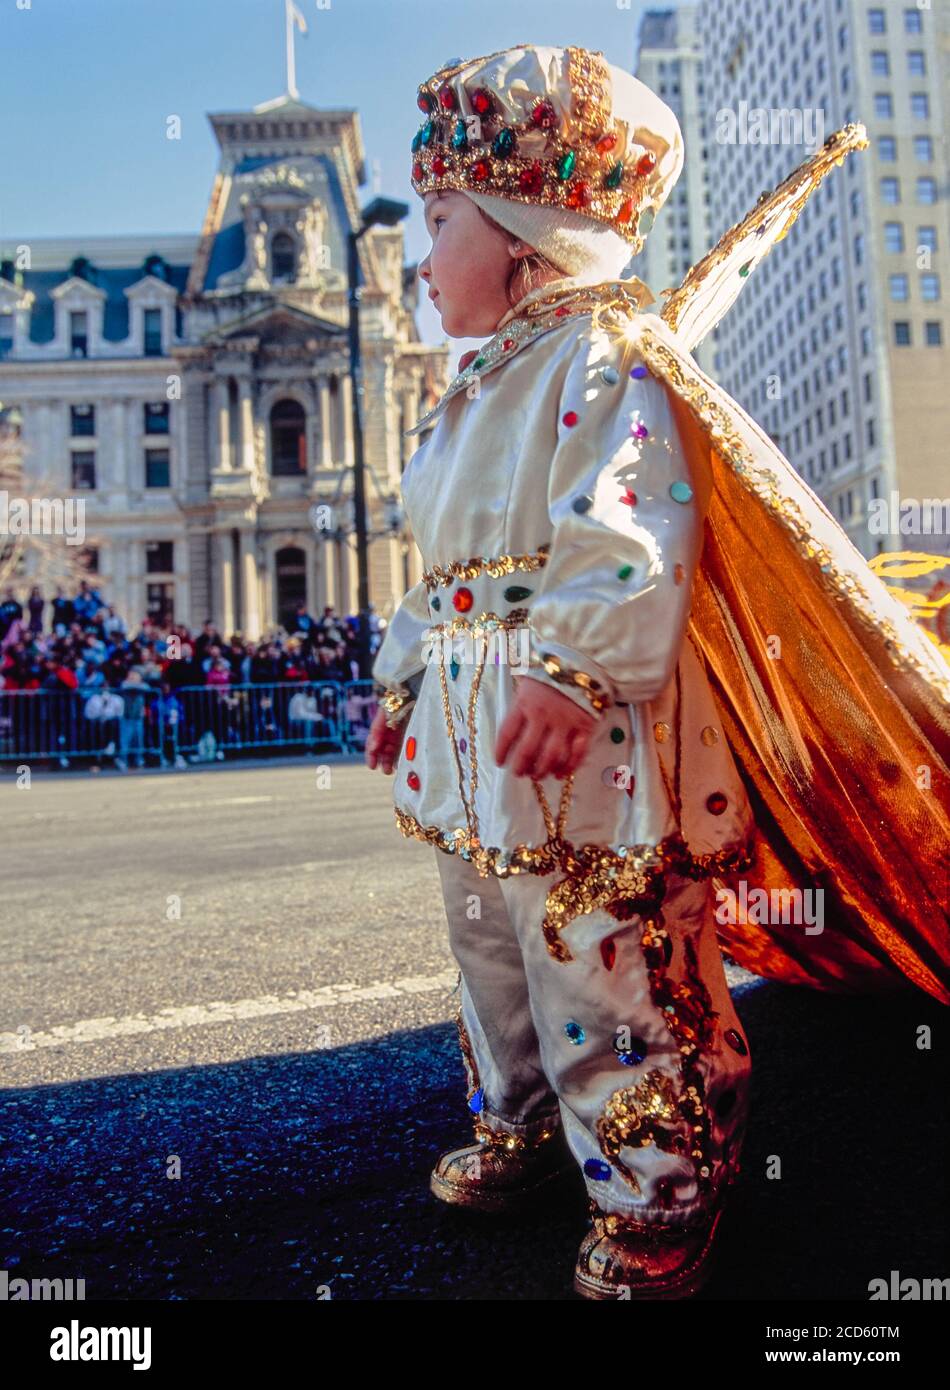 Child in colorful costume during Mummers Parade, Philadelphia, Pennsylvania, USA Stock Photo